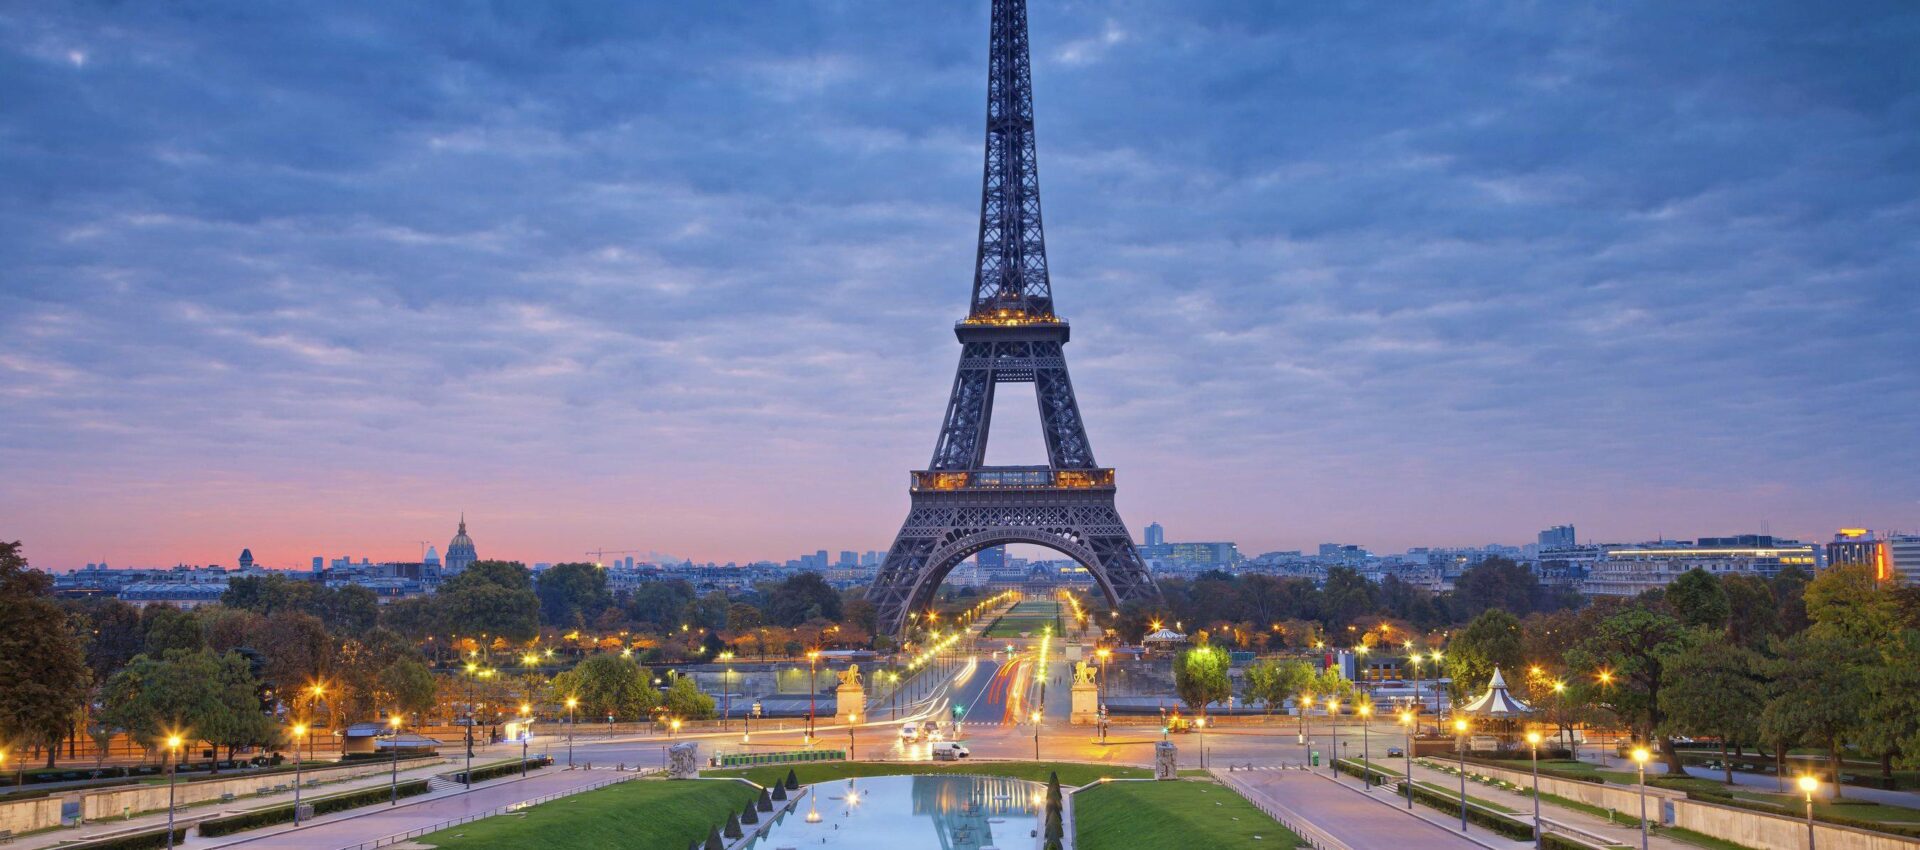 Image of the Eiffel Tower at sunset